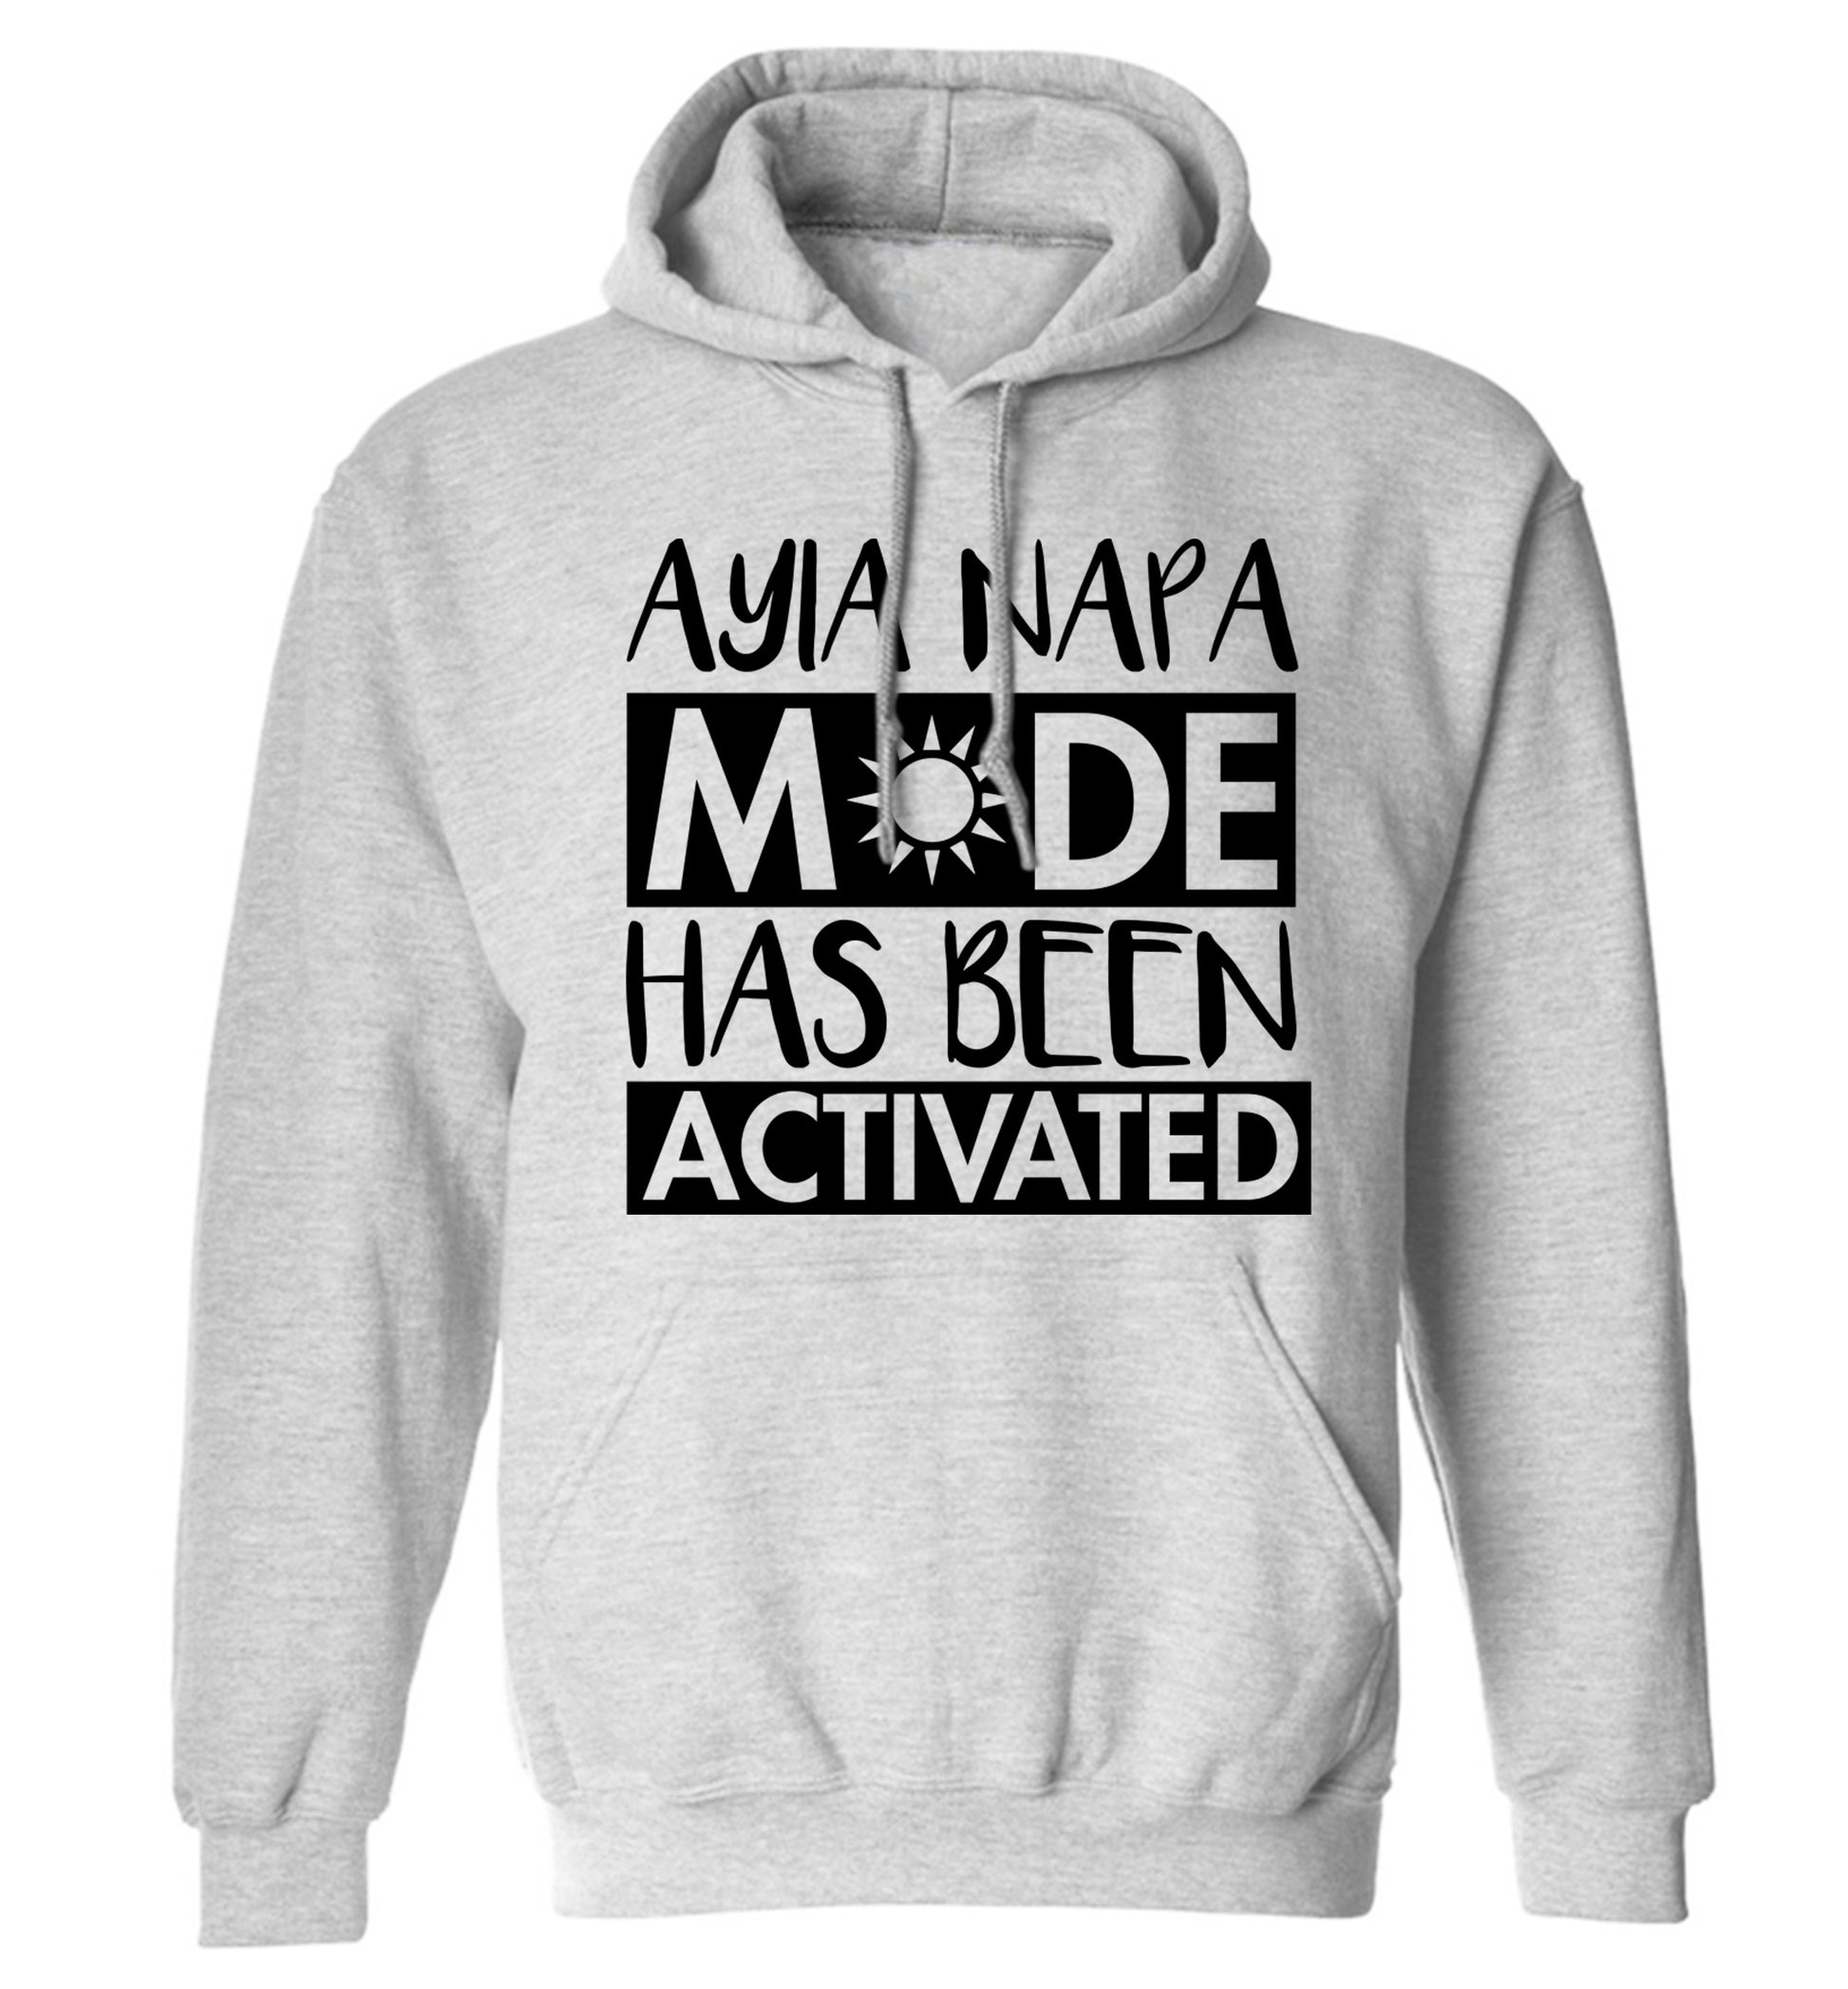 Aiya Napa mode has been activated adults unisex grey hoodie 2XL